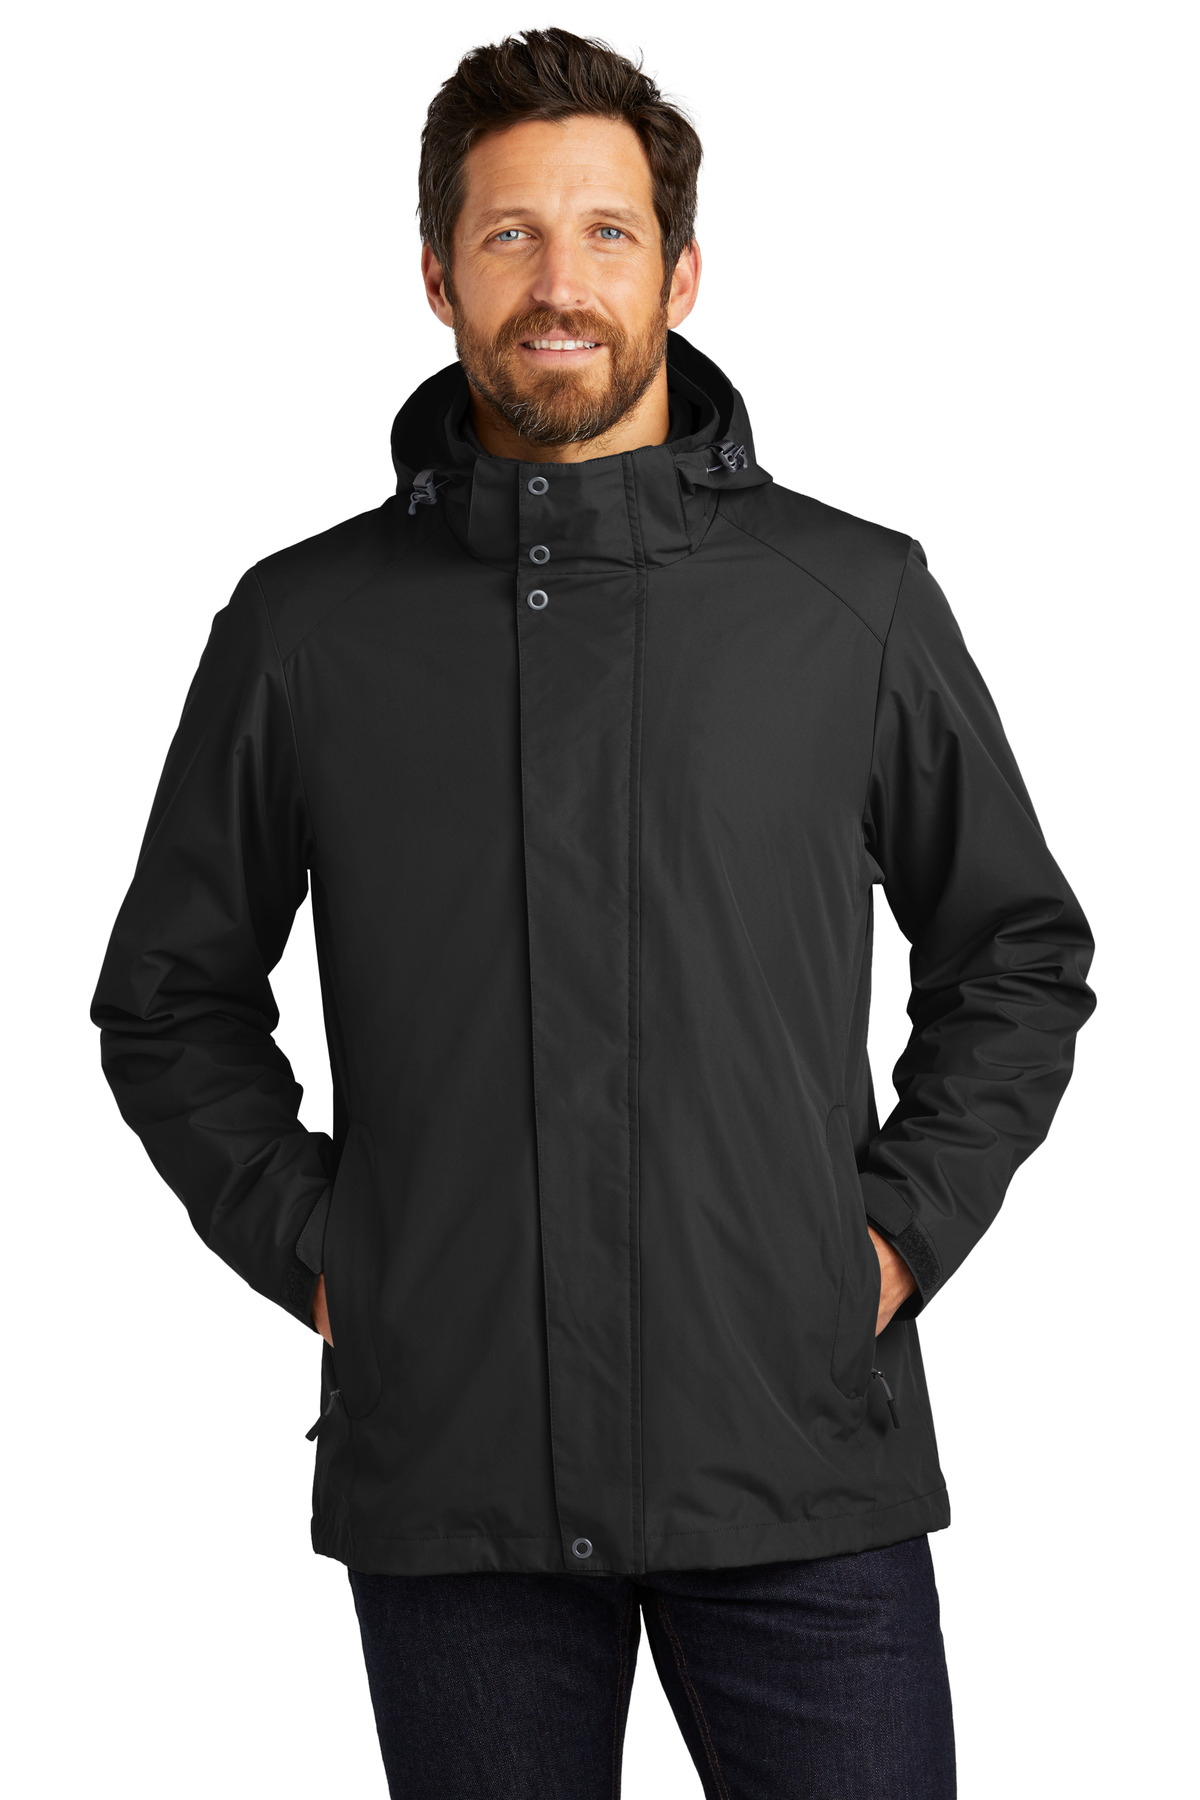 Port Authority All&#45;Weather 3&#45;in&#45;1 Jacket-Port Authority